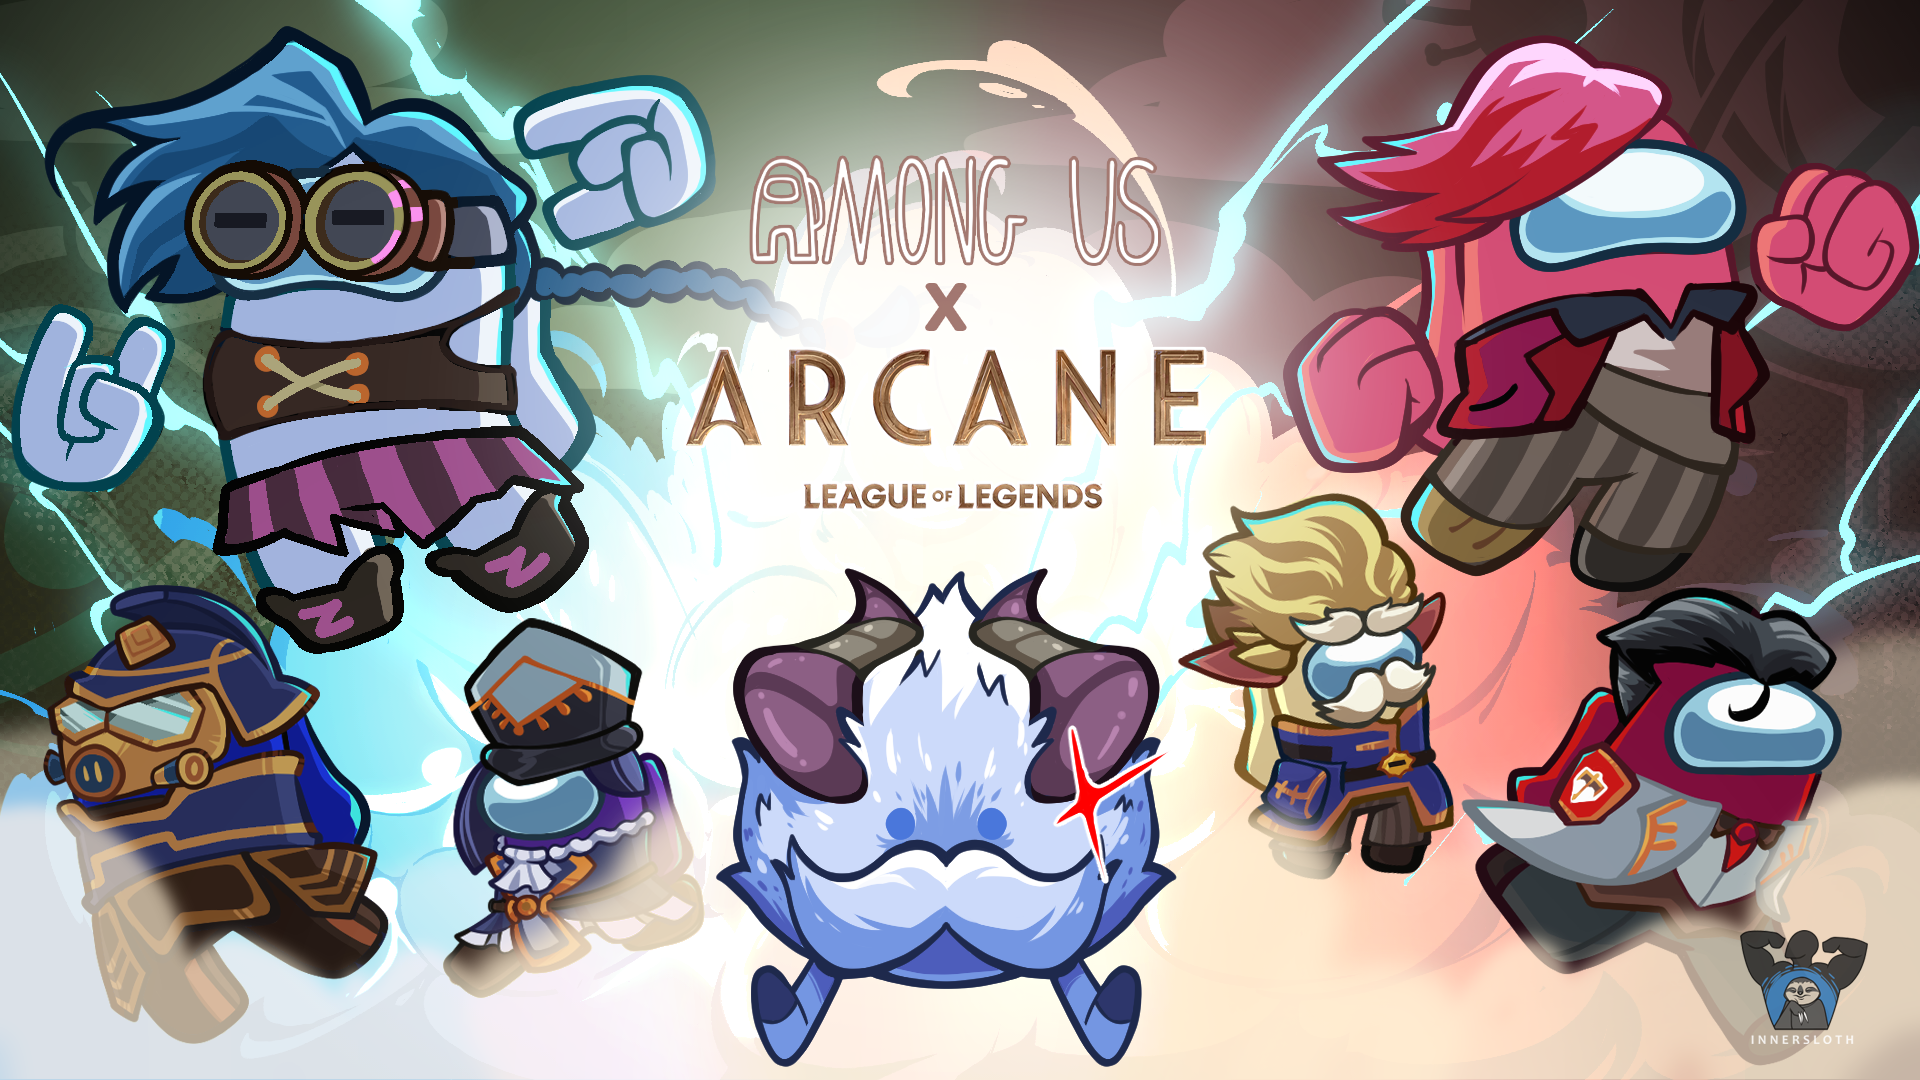 What Only League Of Legends Fans Know About Arcane's Characters